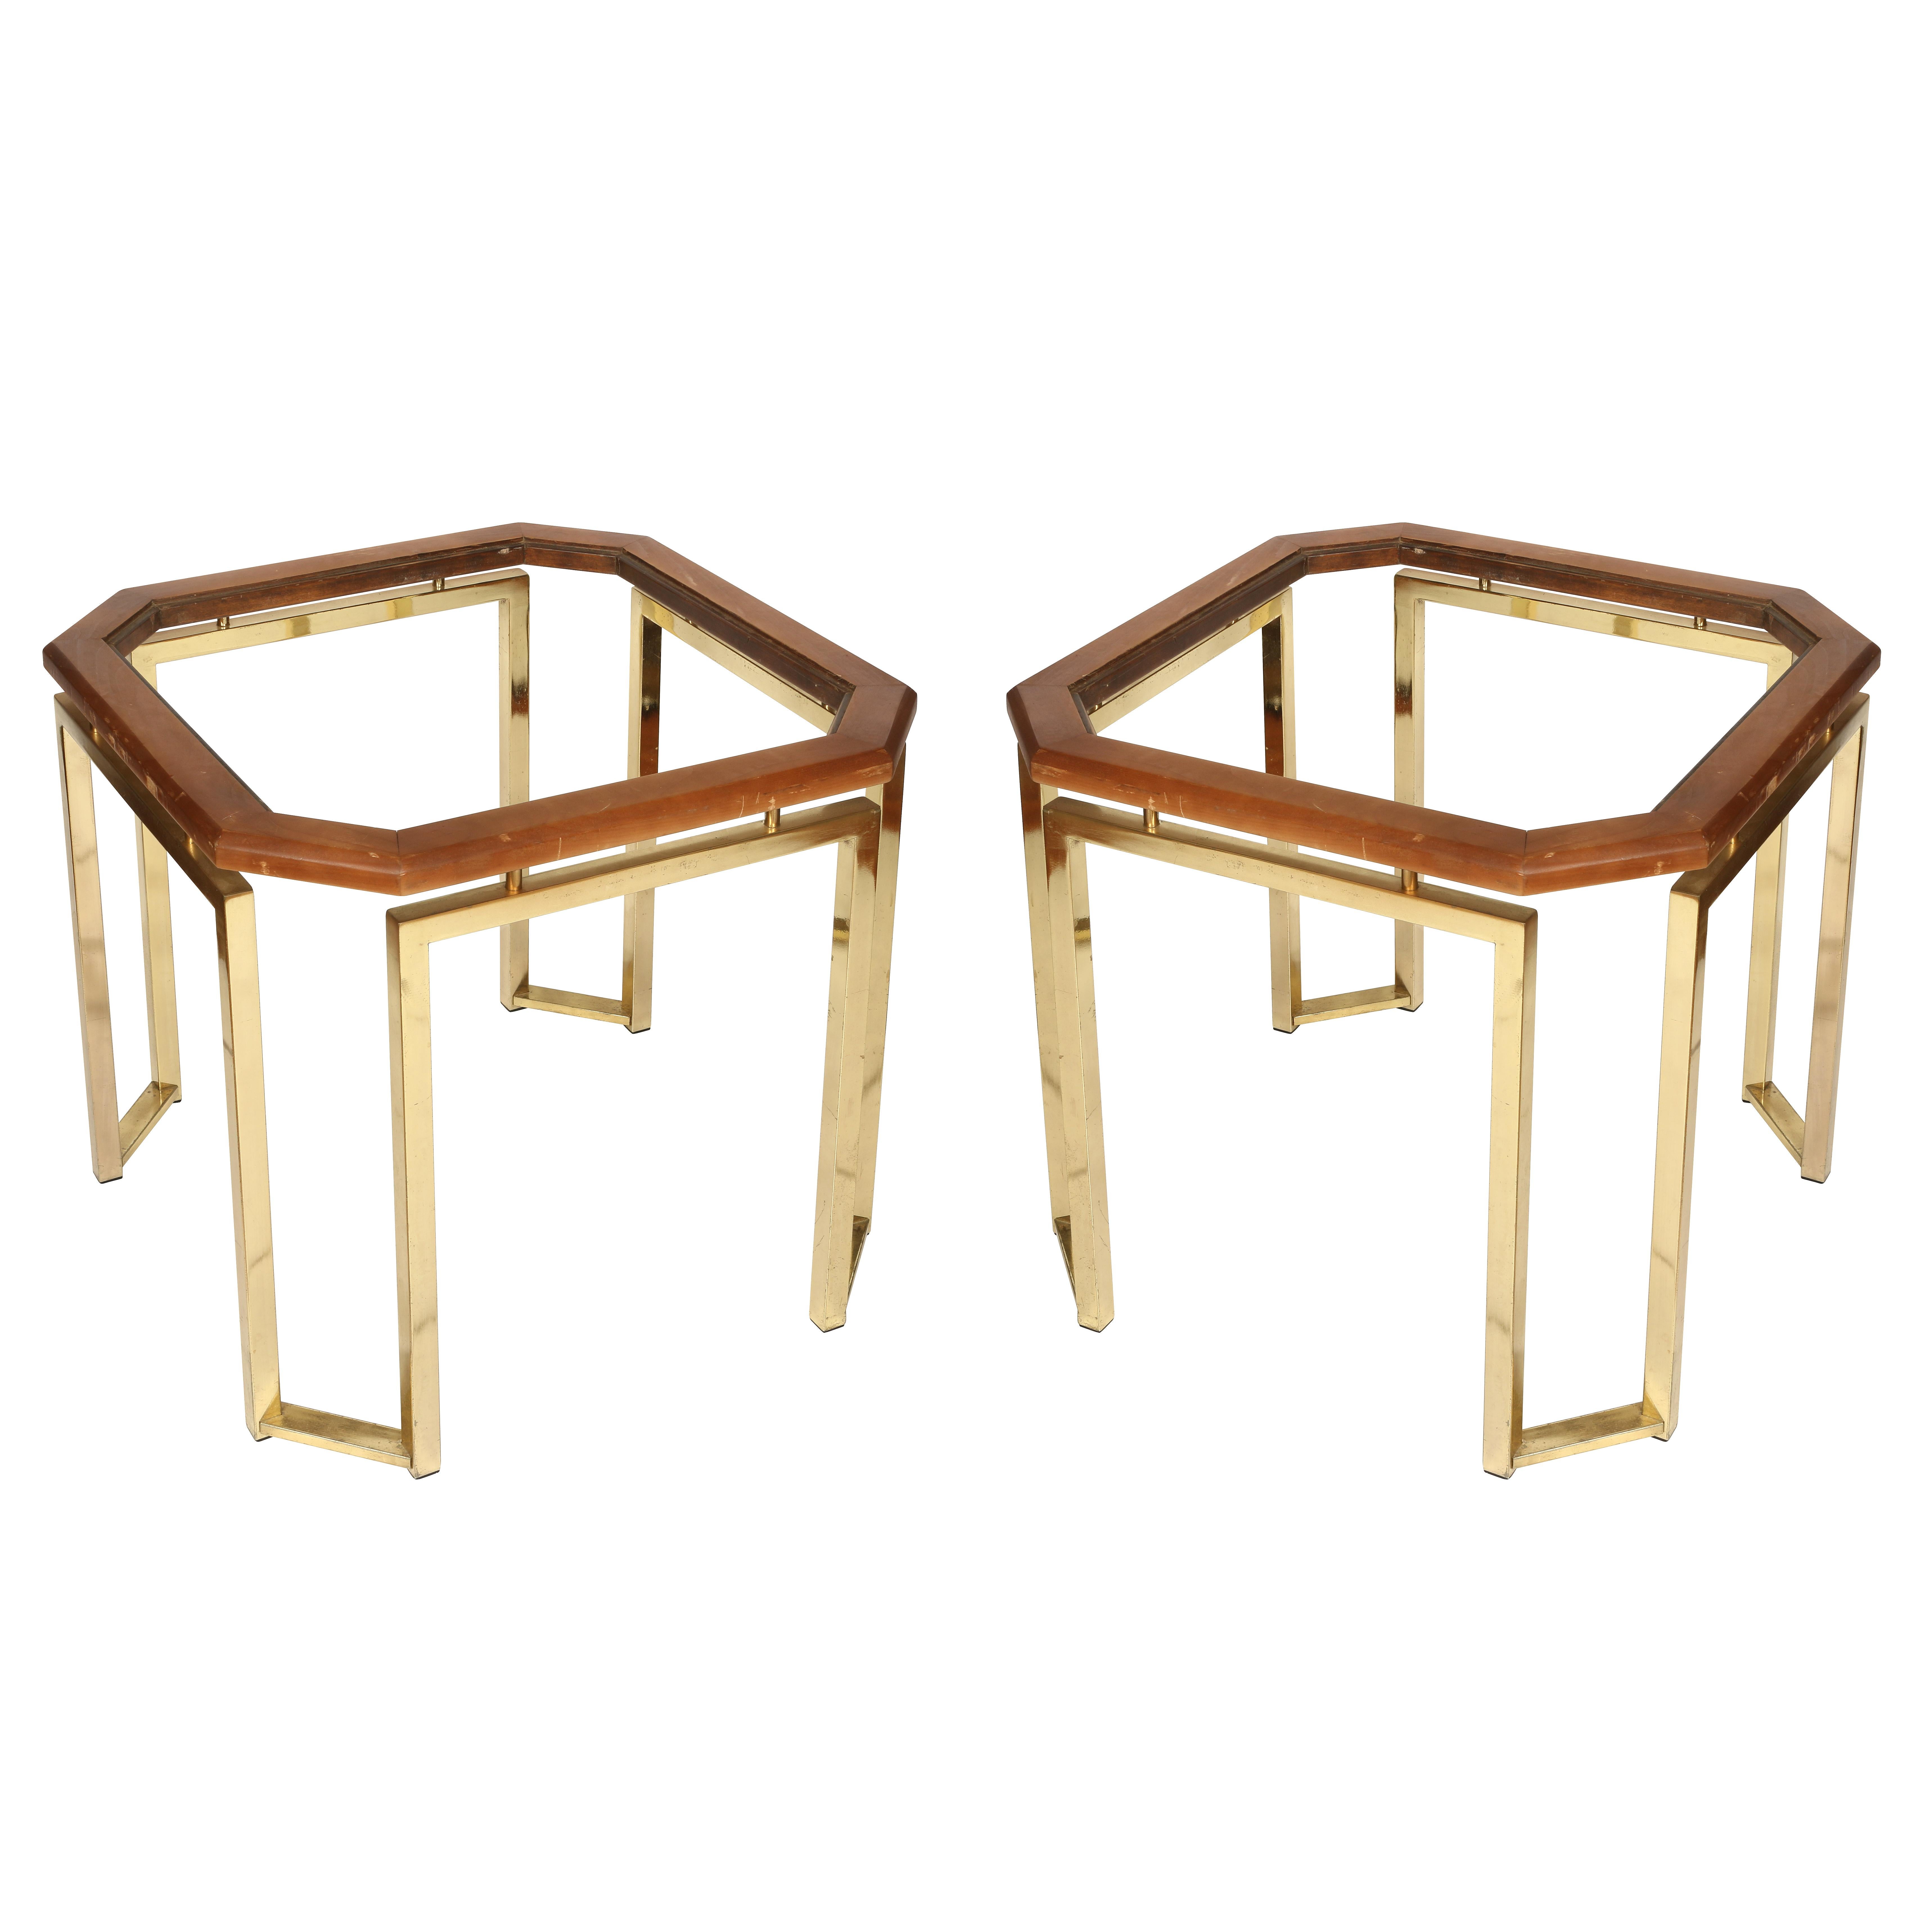 A pair of brass and wood James Mont style octagonal-shaped side tables.